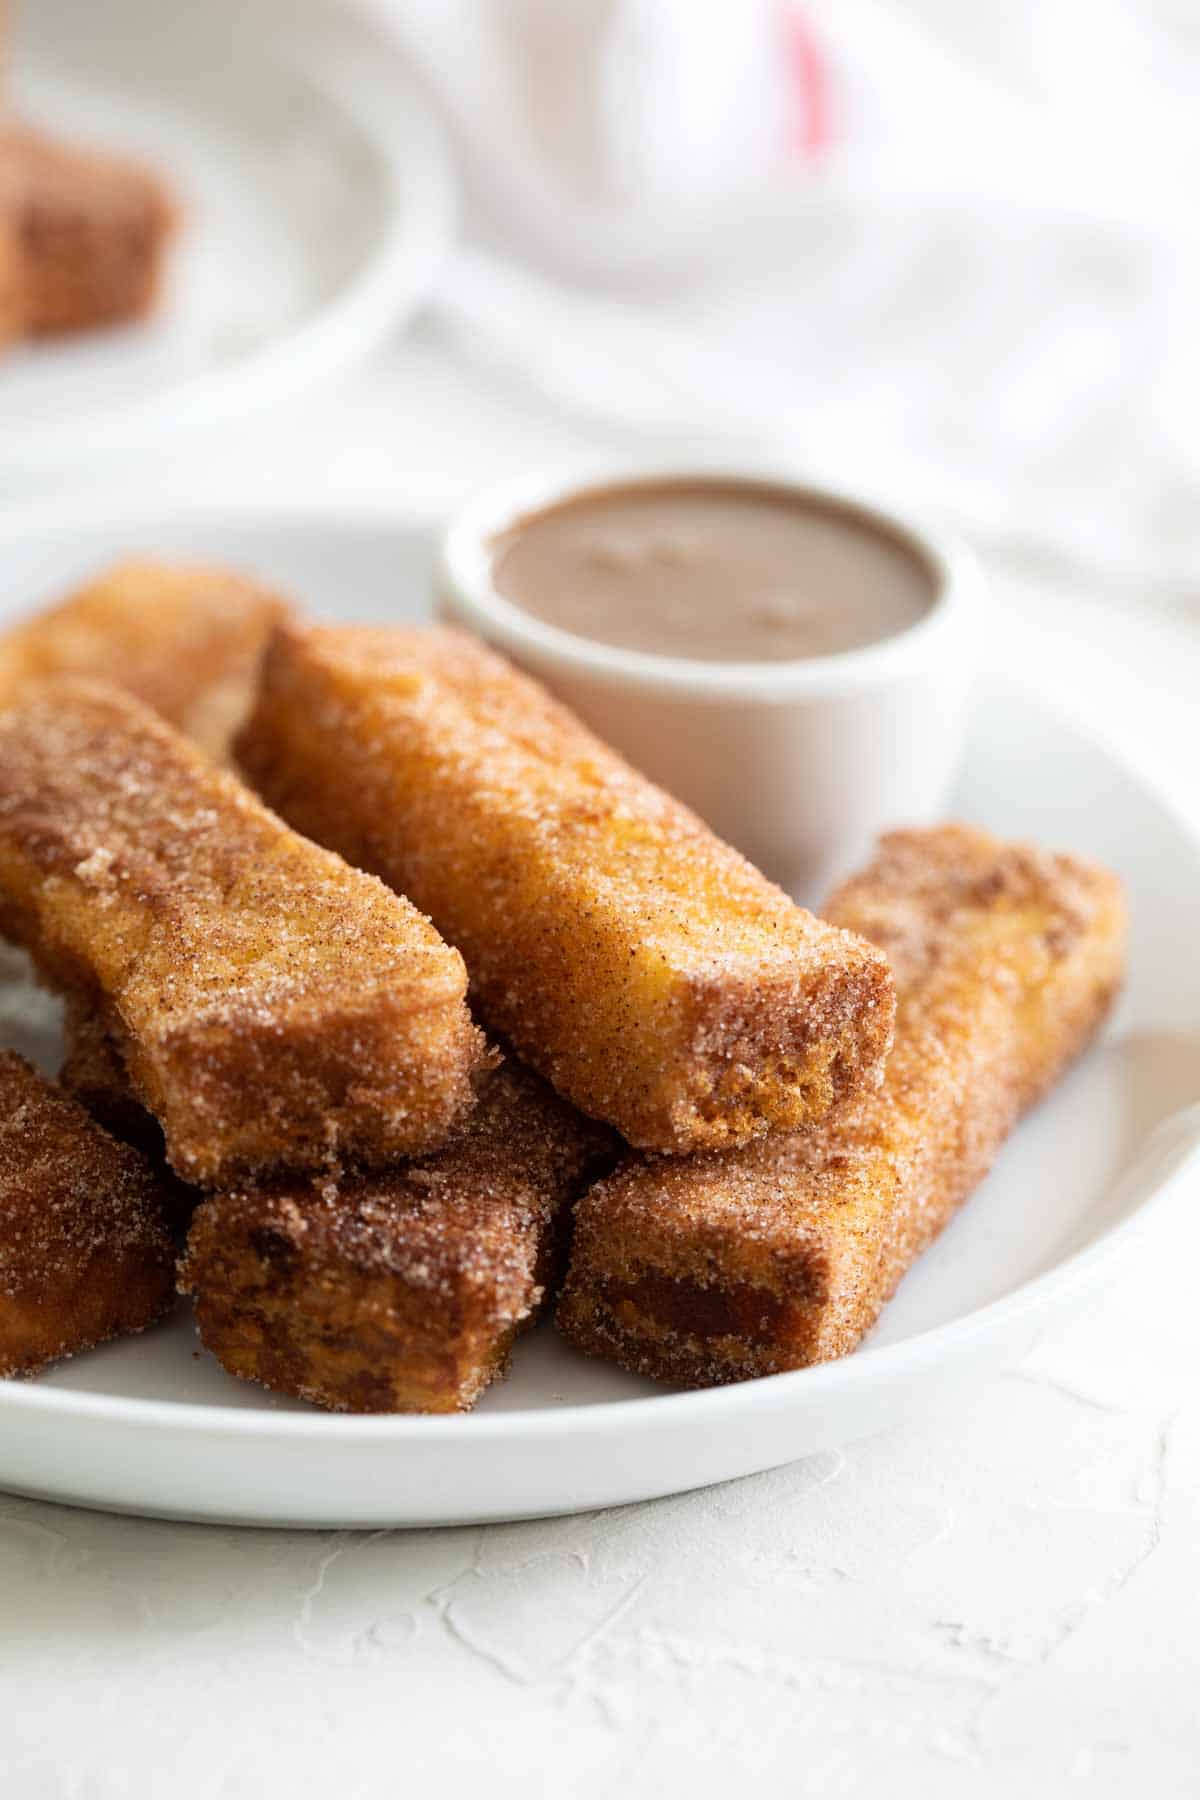 French Toast Sticks with buttermilk syrup in the background for dipping.